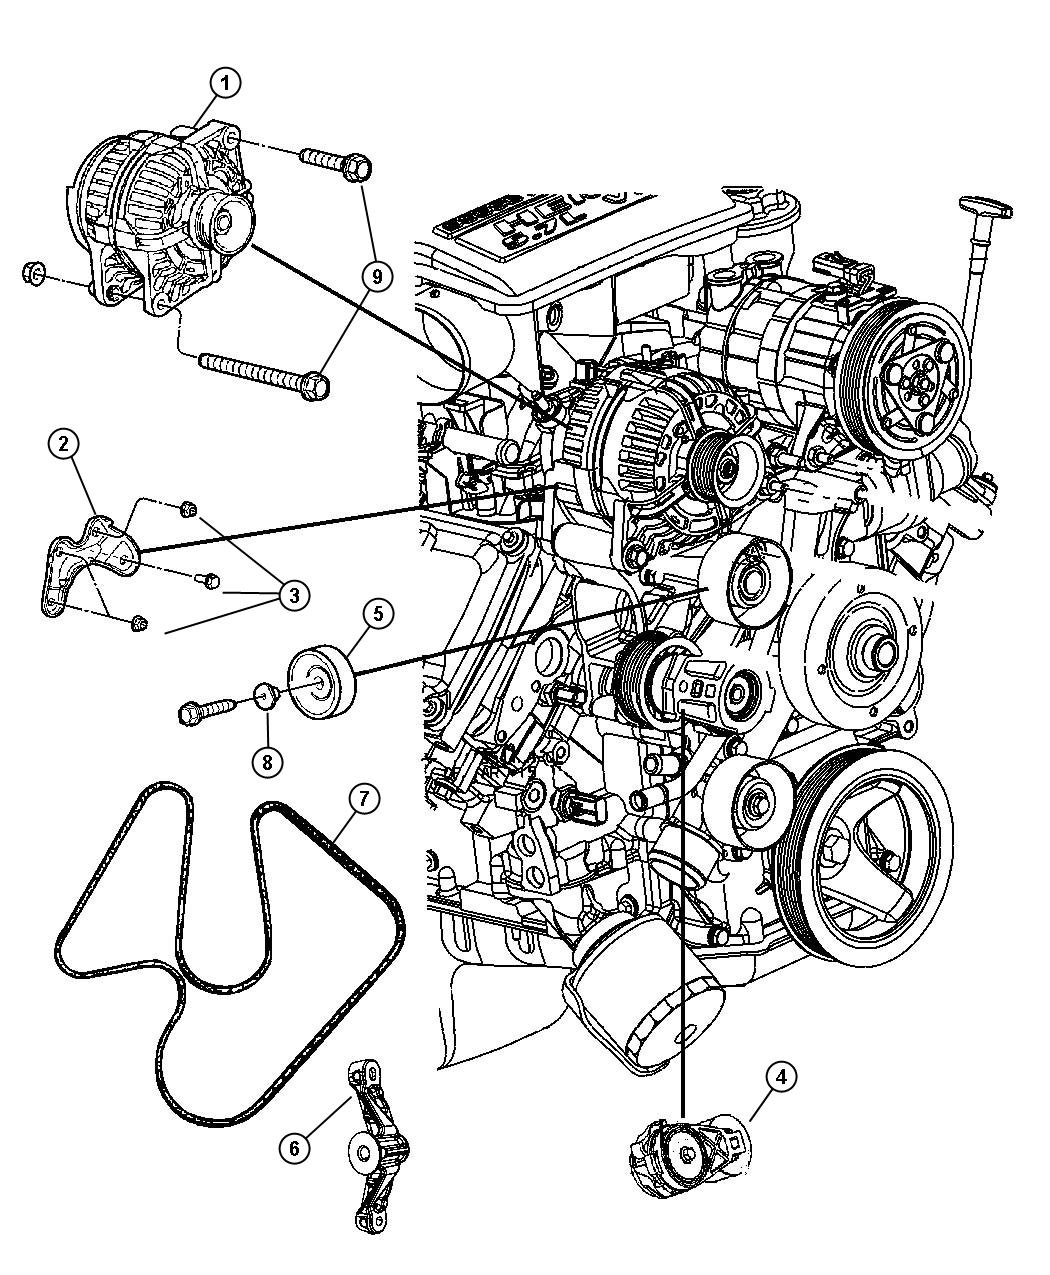 Alternator and Related Parts. Diagram